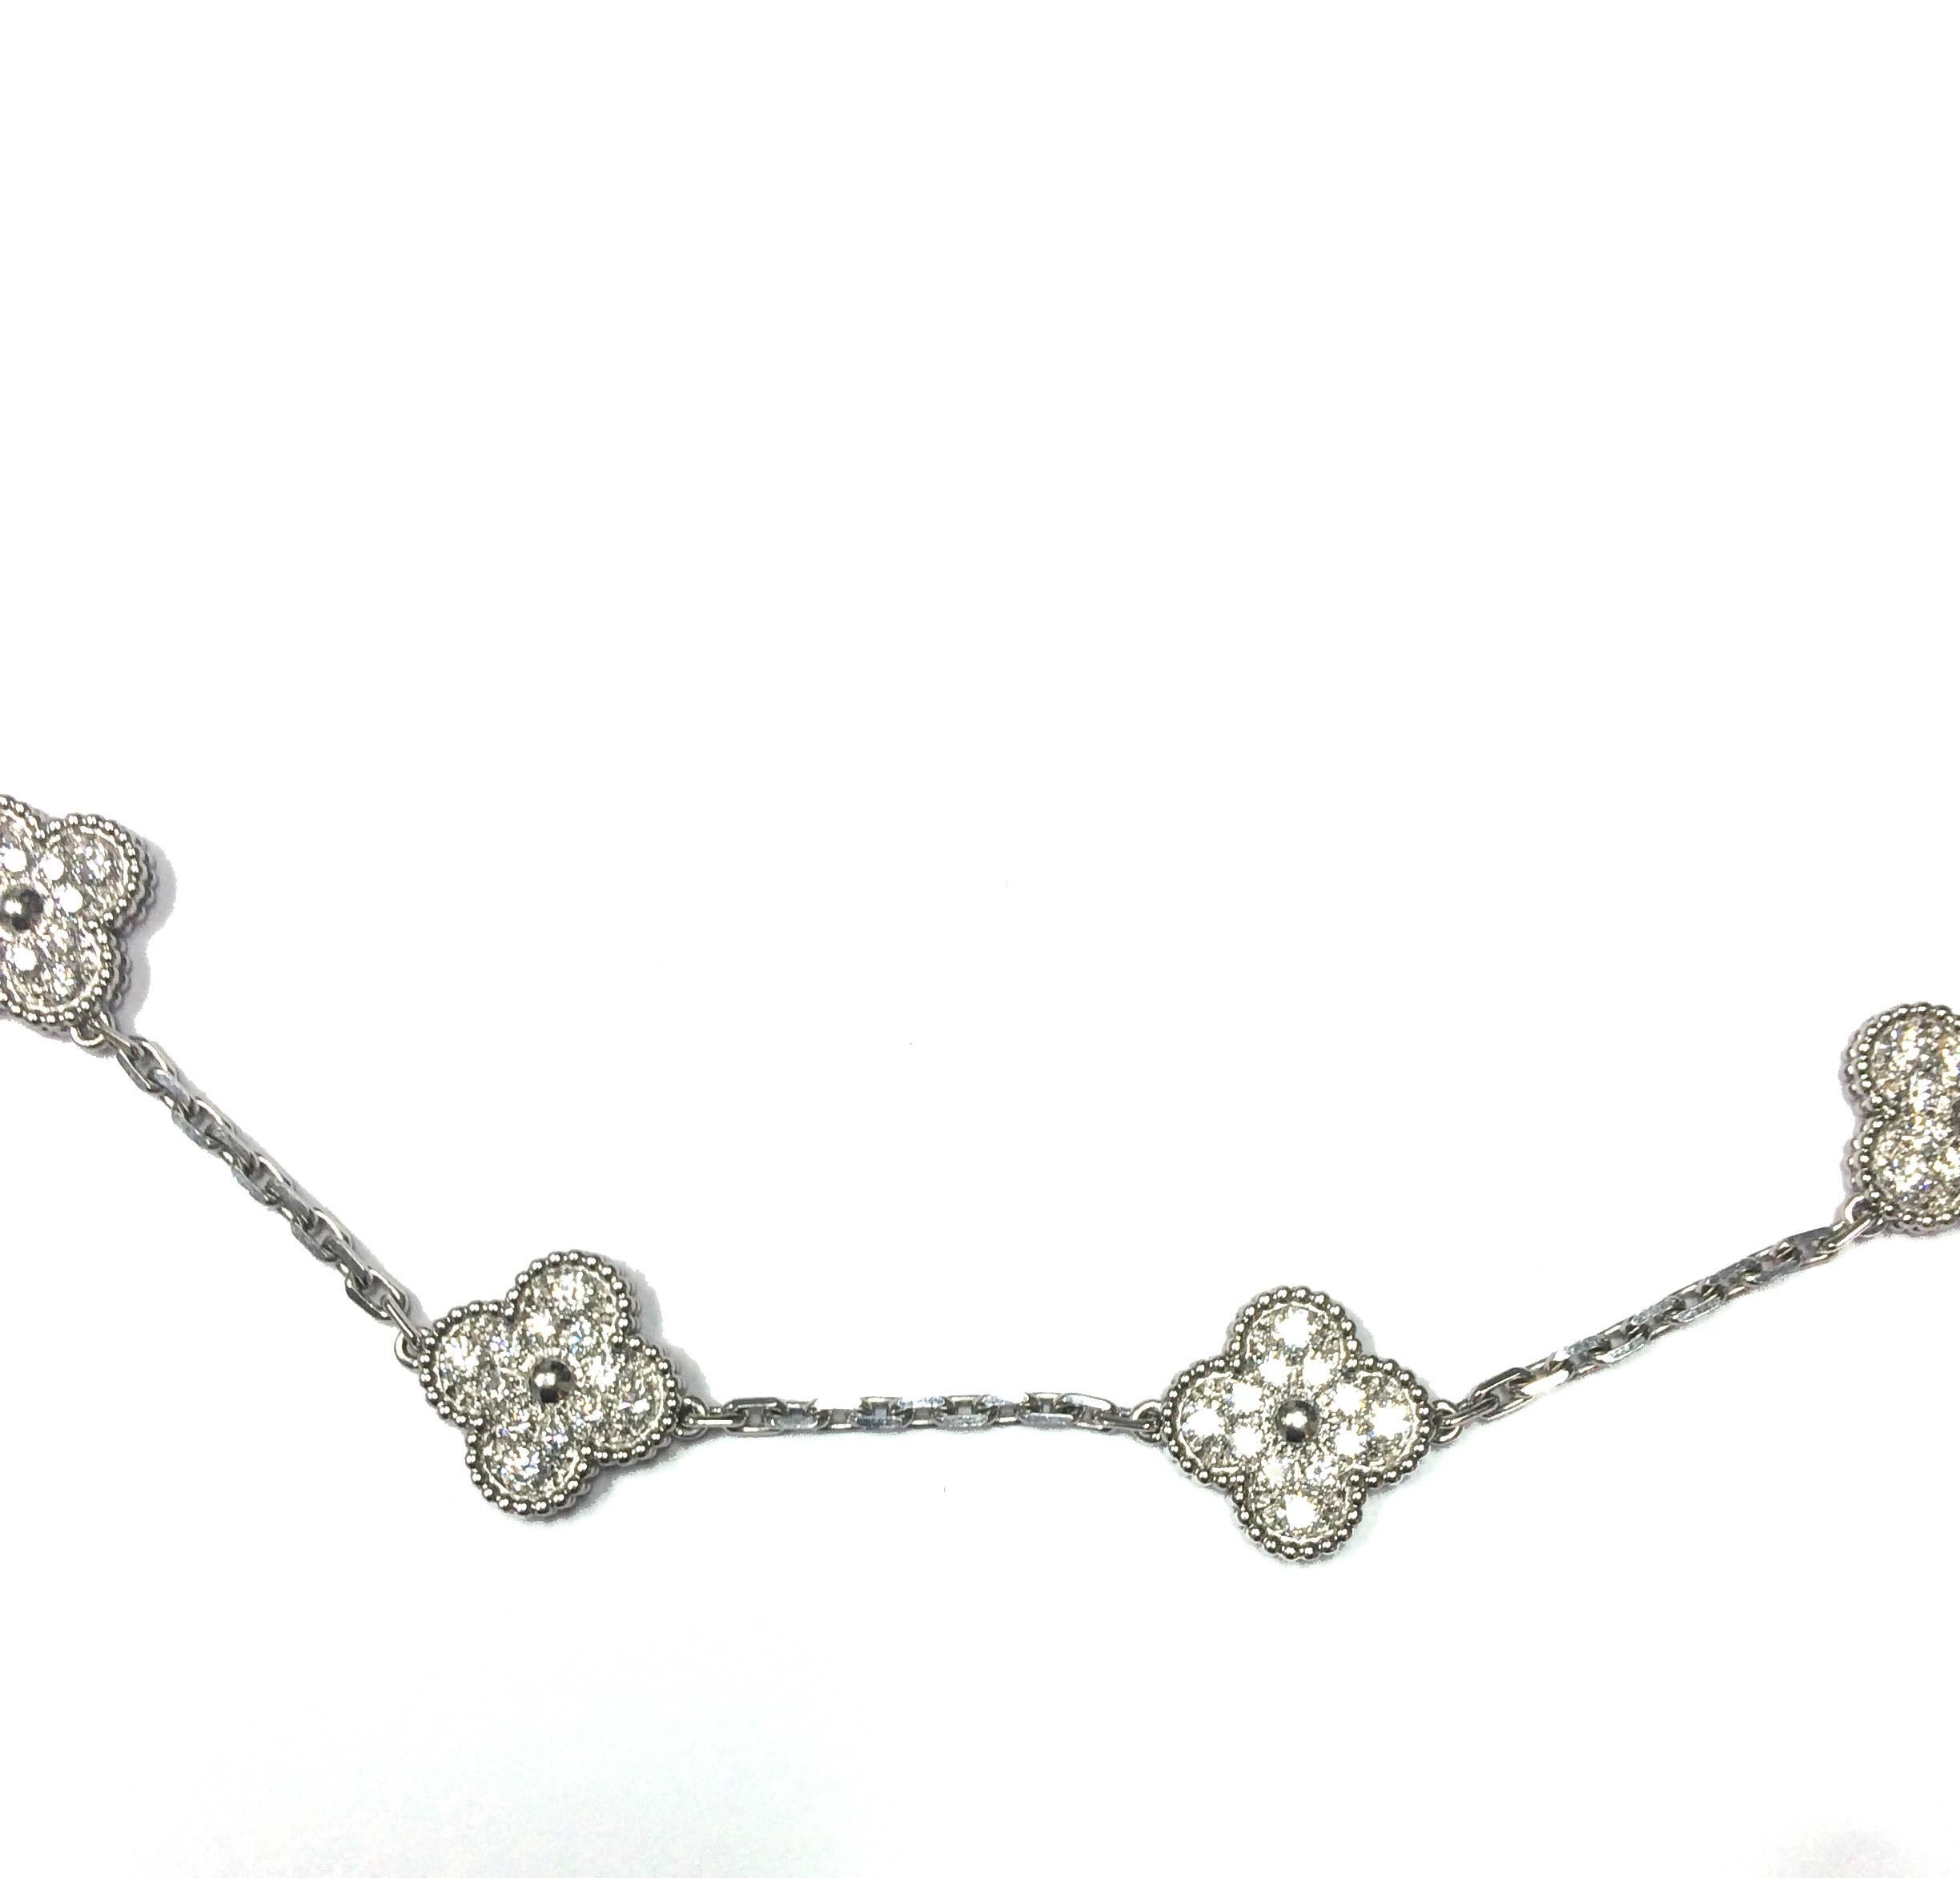 Vintage Alhambra long Diamond Necklace 20 Motifs in 18kt white gold with pavé-set diamonds clovers. 9.66 total carats of diamonds. 14mm diameter each clover (approximately 9/16